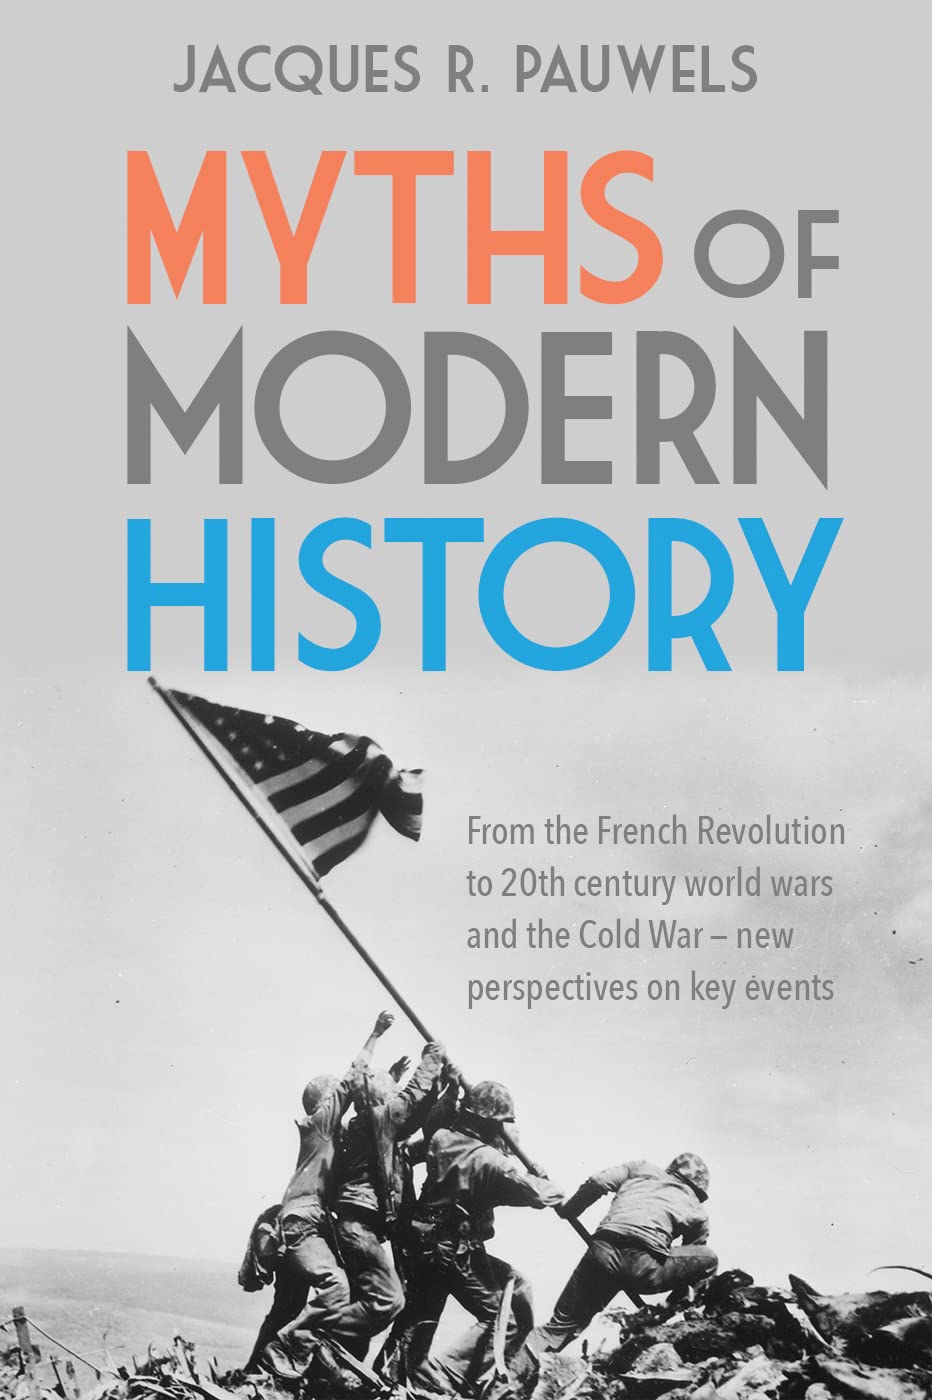 Myths of Modern History: From the French Revolution to the 20th Century World Wars and the Cold War - New Perspectives on Key Events (Paperback)